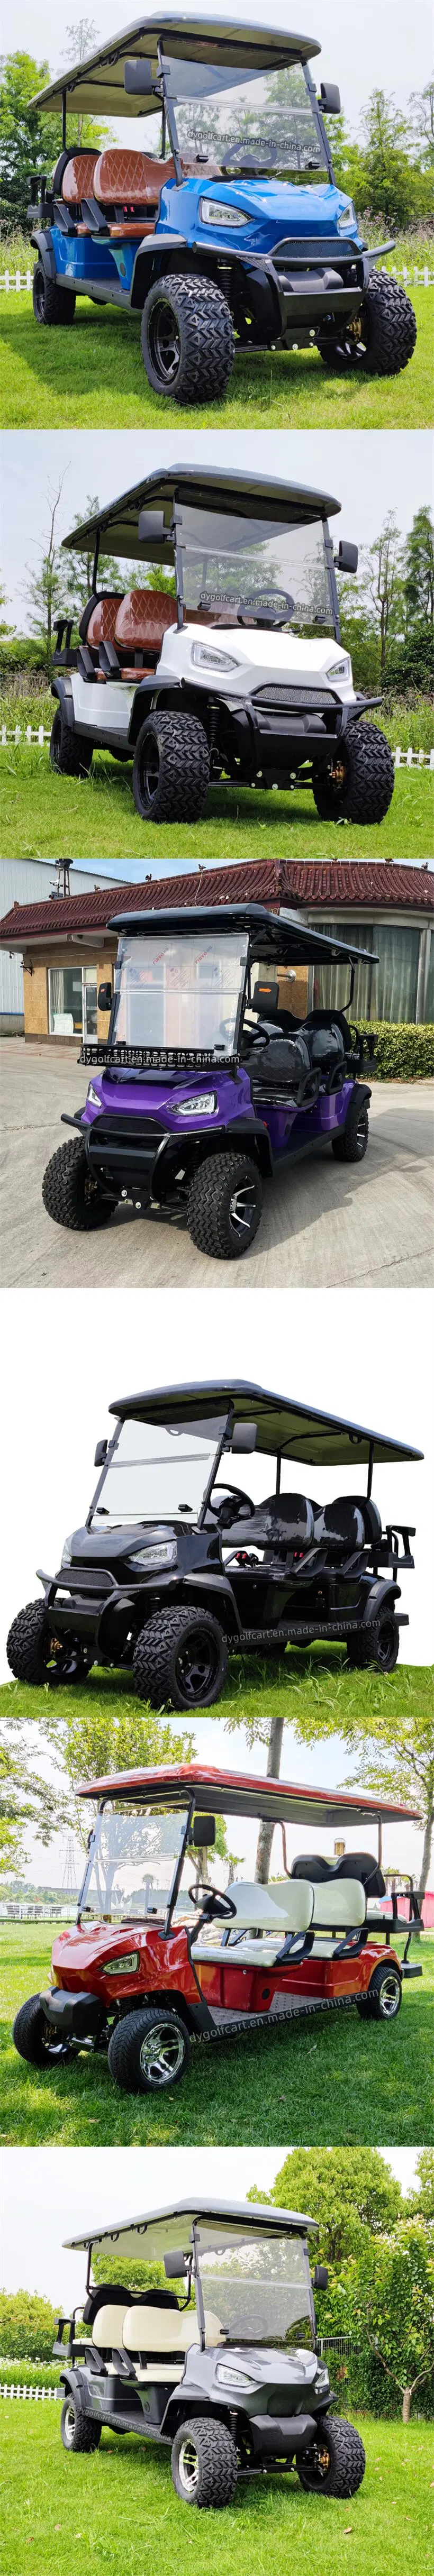 Practical Product 2 Seater Golf Cart 48V/72V Electric Golf Cart for Family Hotel Hunting